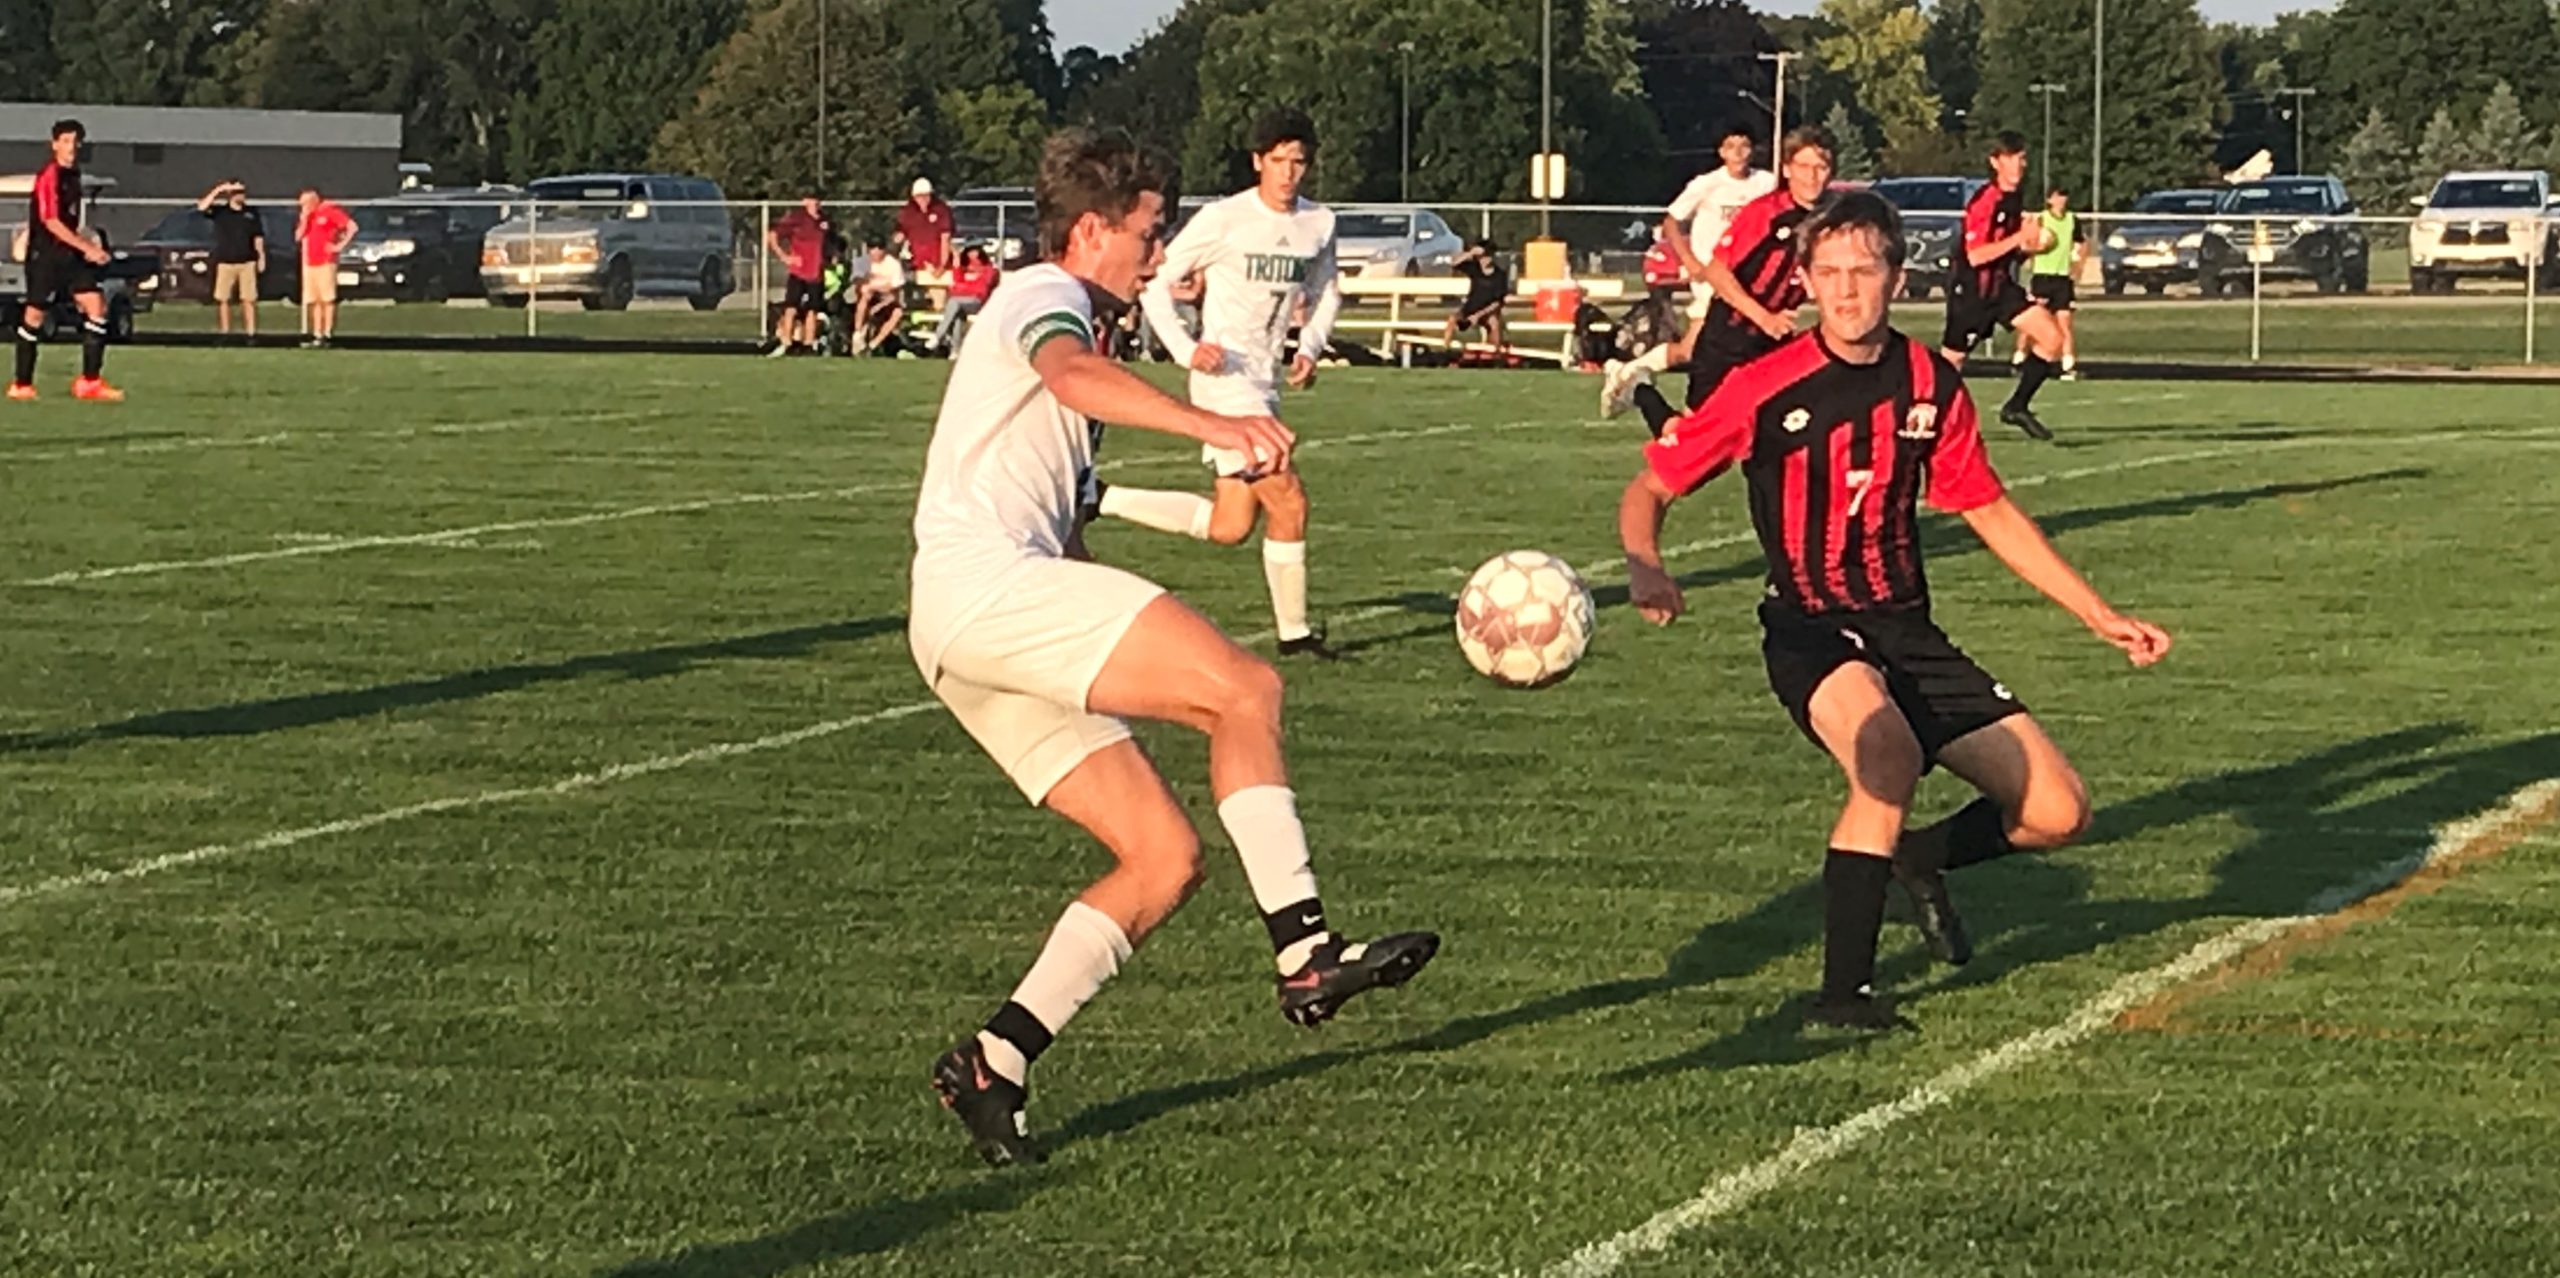 Lawton, Notre Dame beat rival Seymour with late goal